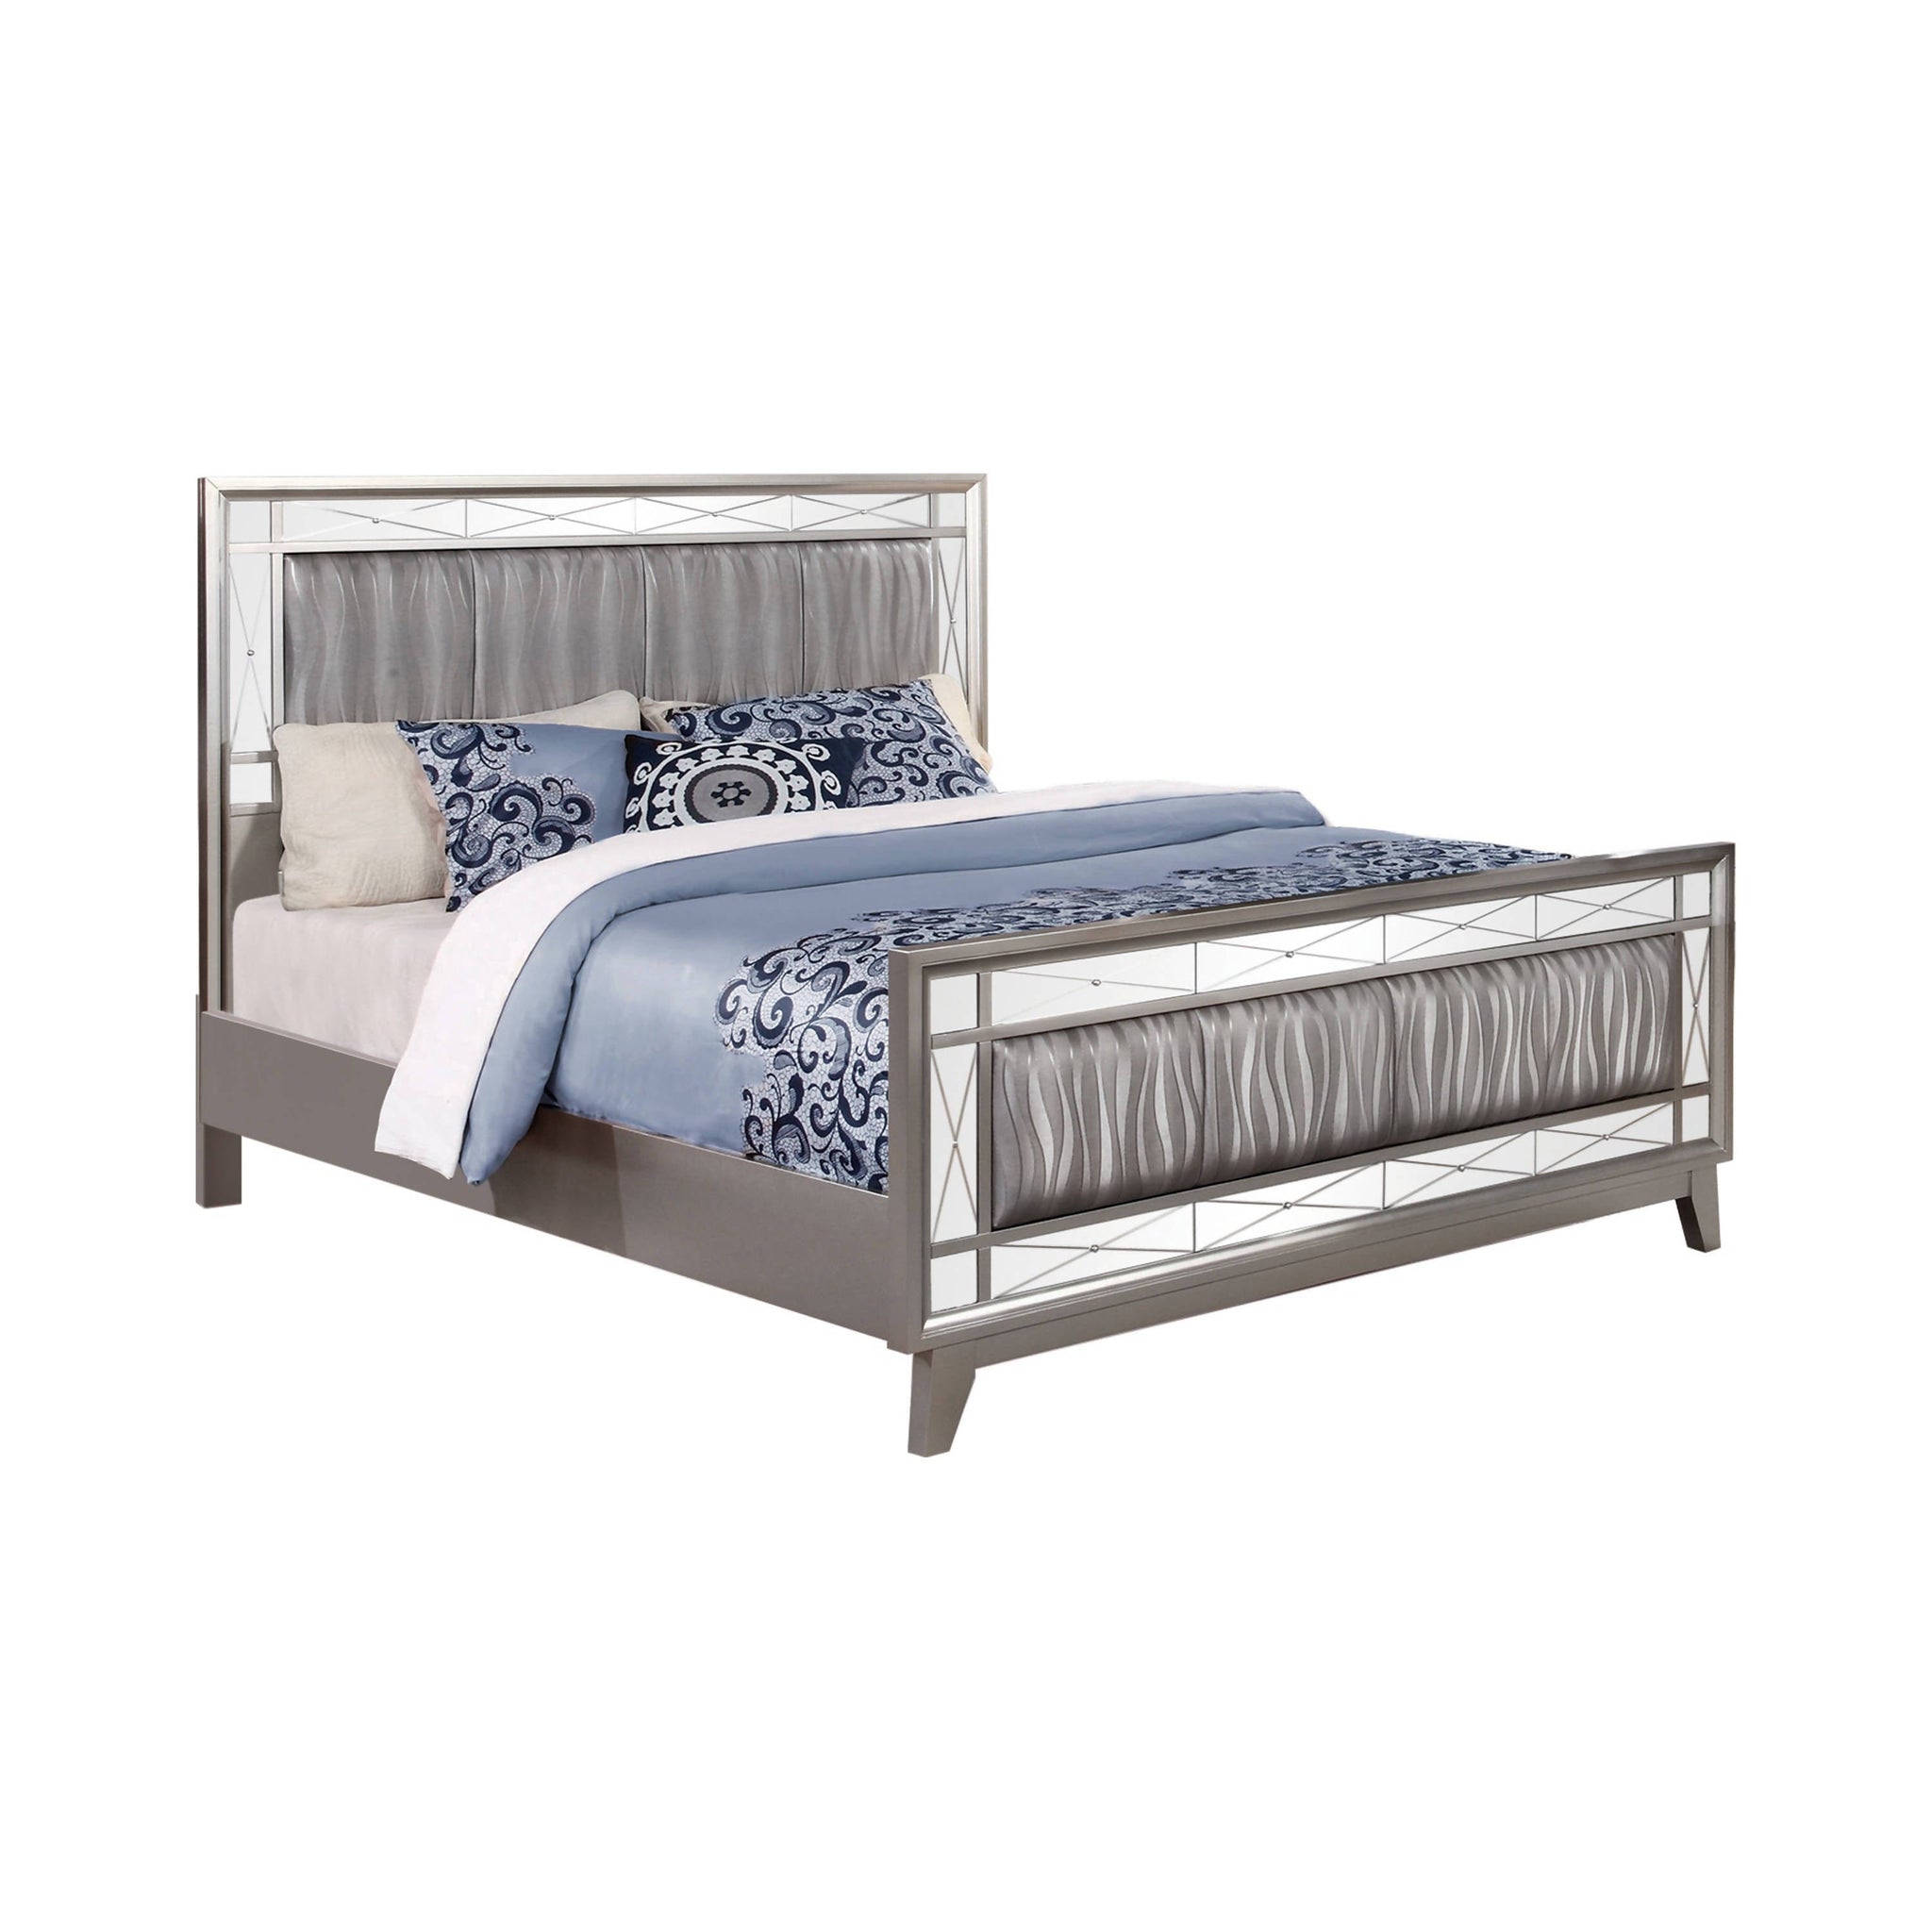 Leighton Queen Panel Bed With Mirrored Accents Mercury Metallic Collection: It Has An Upgraded Metallic Finish That Evokes Images Of Sparkling Mercury. This Bed Is An Absolute Delight For The Bedroom. Leighton SKU: 204921Q